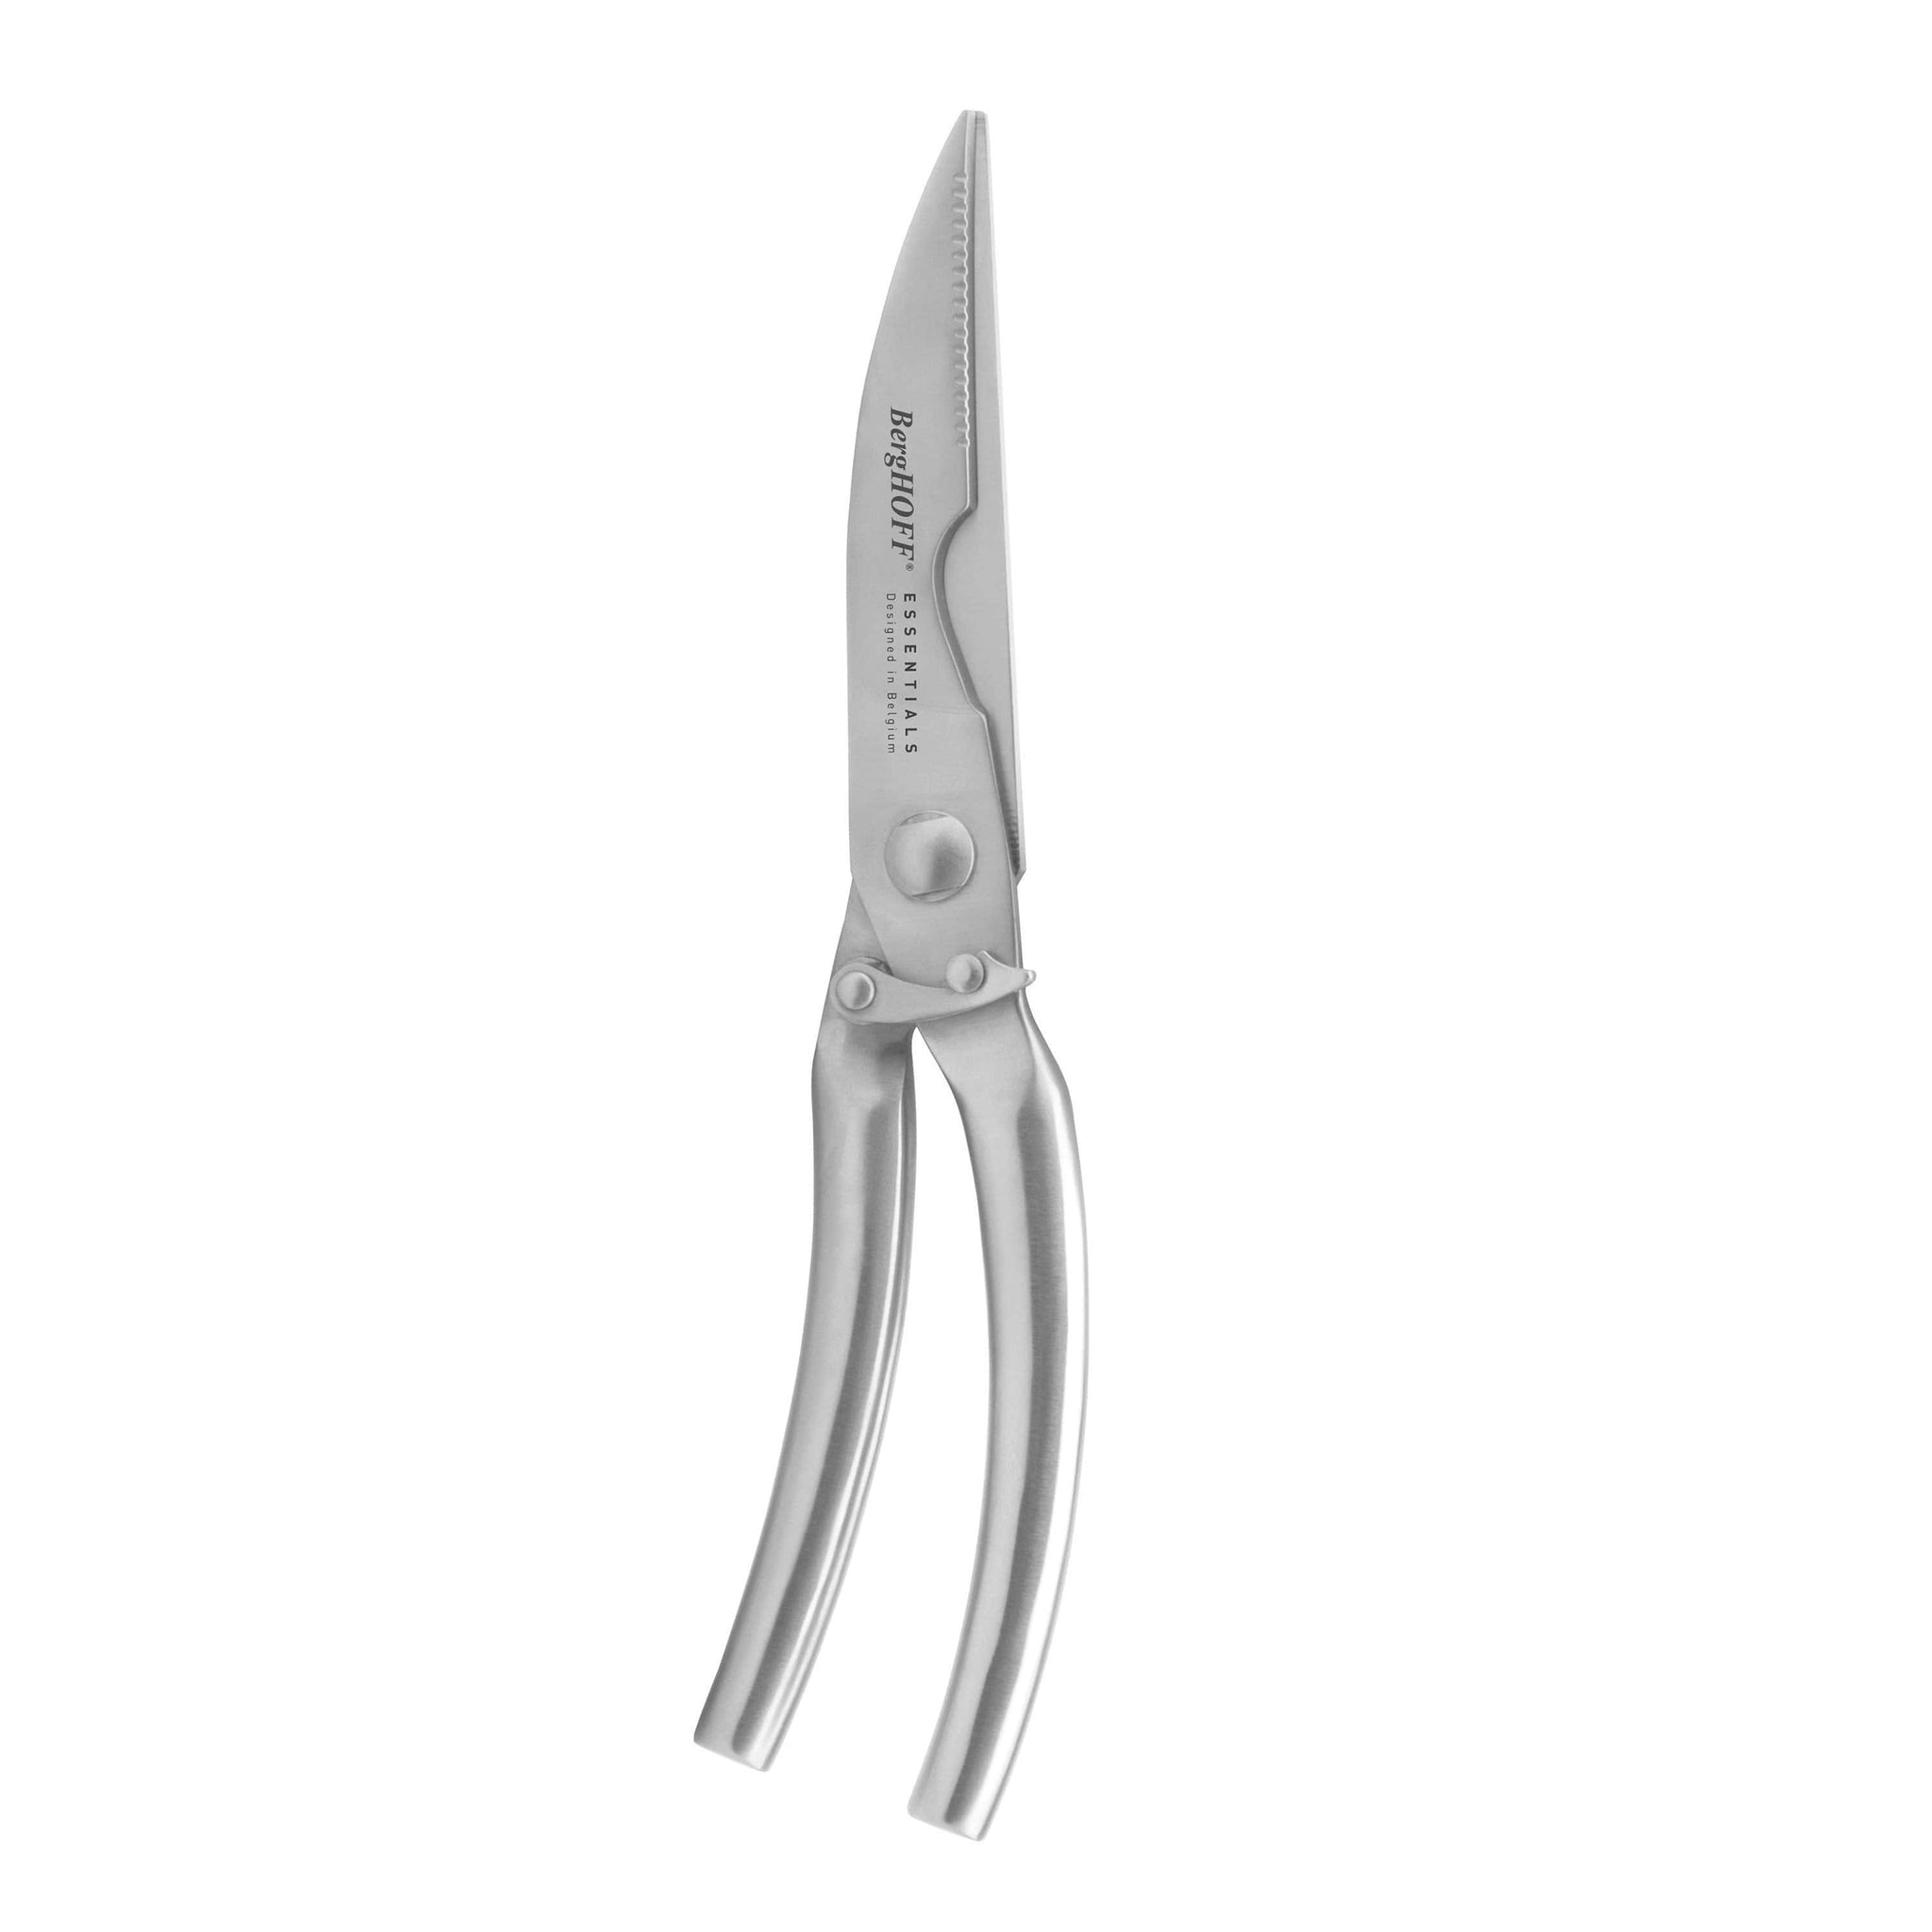 BergHOFF - Poultry Shears - Stainless Steel - 24cm - 80001568